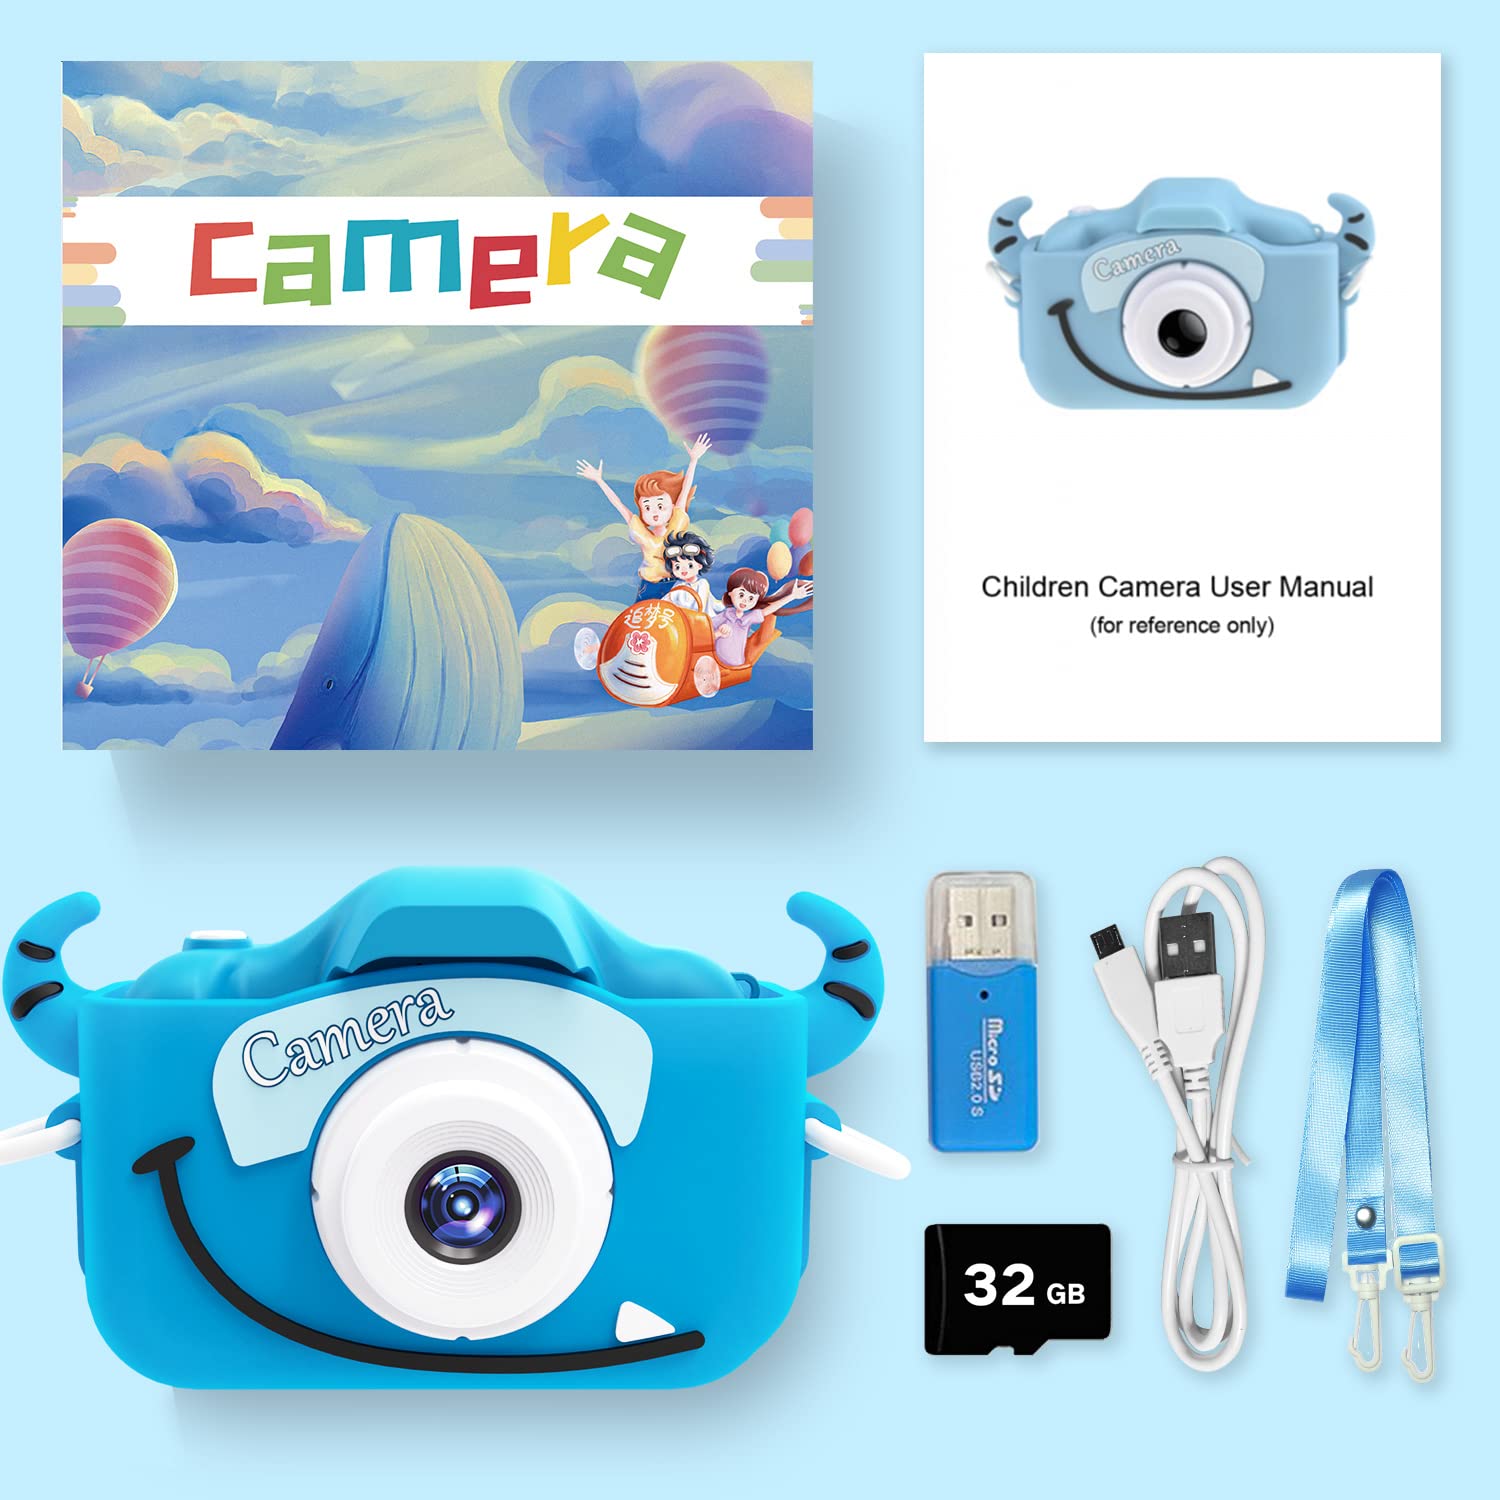 Goopow Kids Camera Toys for 6-12 Year Old Girls and Boys,Children Digital Video Camcorder Camera with Cartoon Soft Cover, Best Christmas Birthday Festival Gift for Kids - 32G SD Card Included